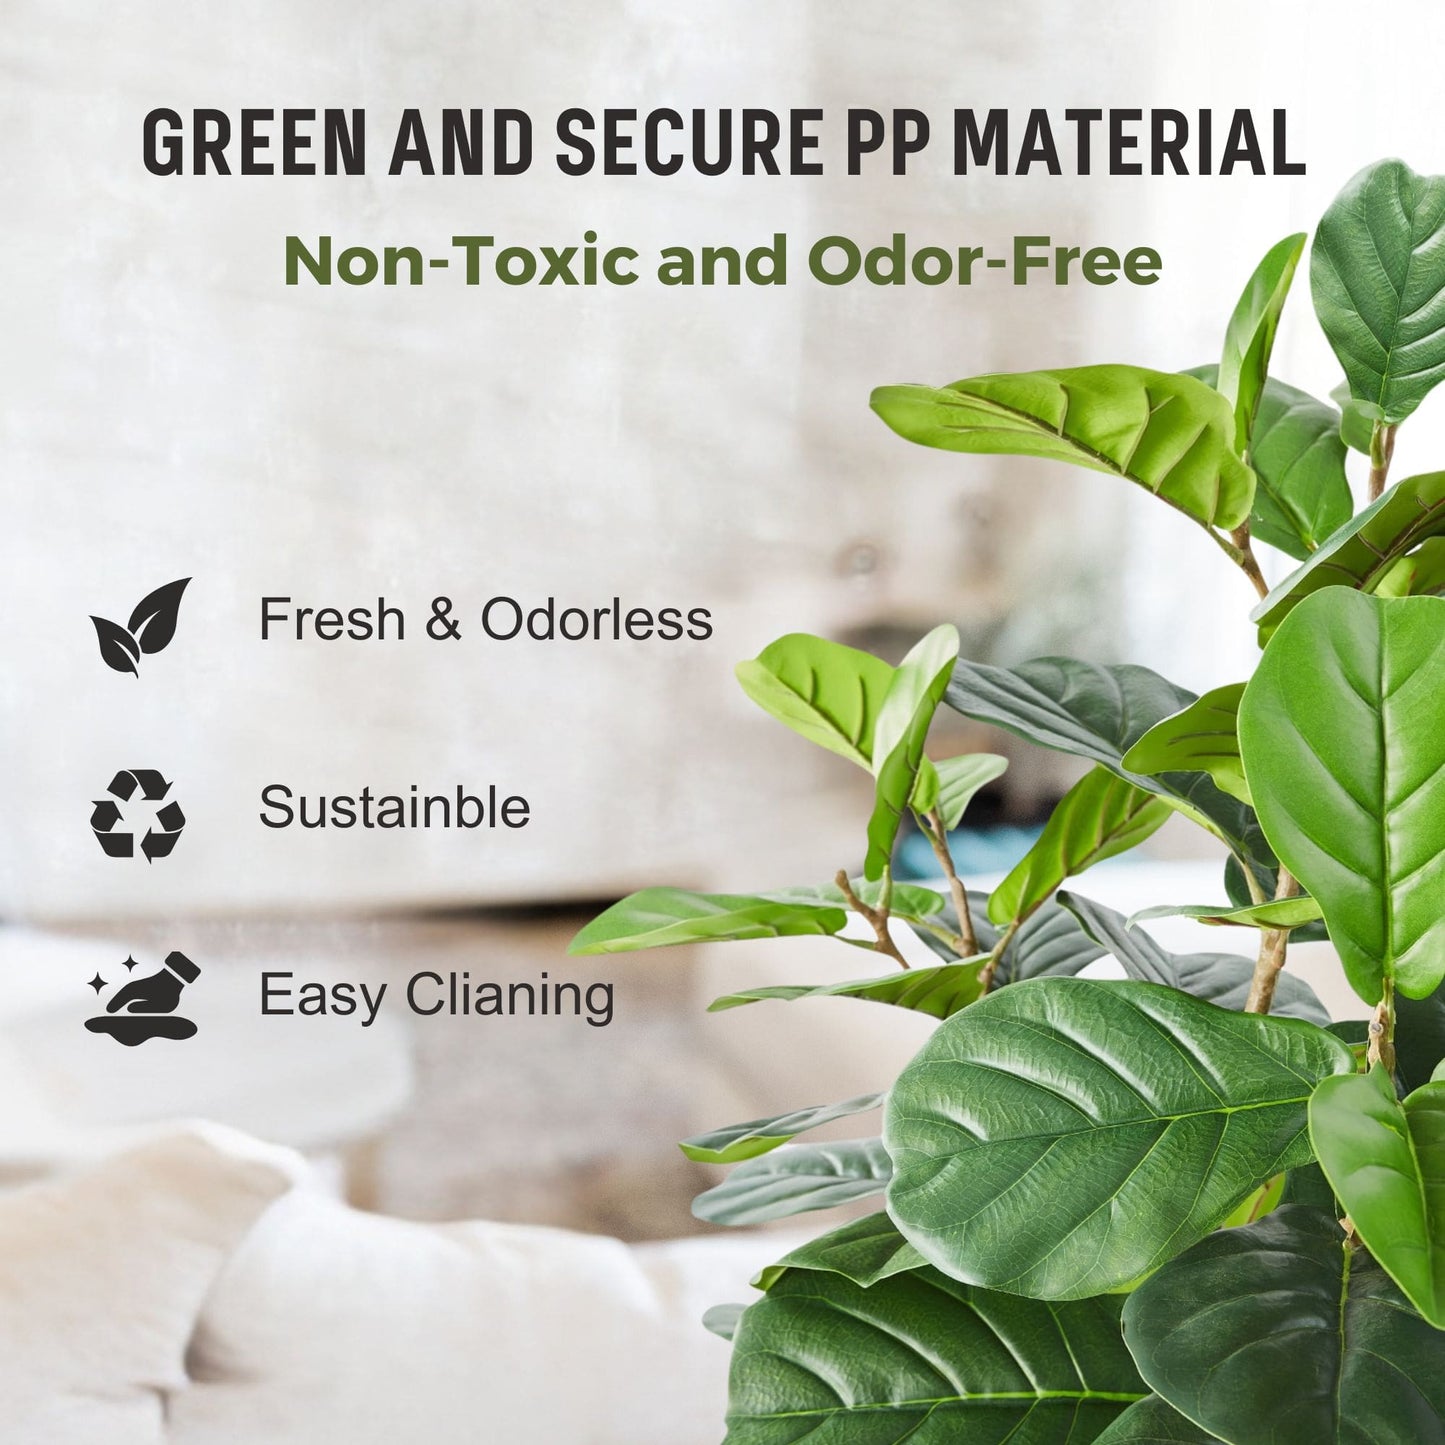 Green and secure PP material used in non-toxic and odor-free artificial Fiddle Leaf Fig plant